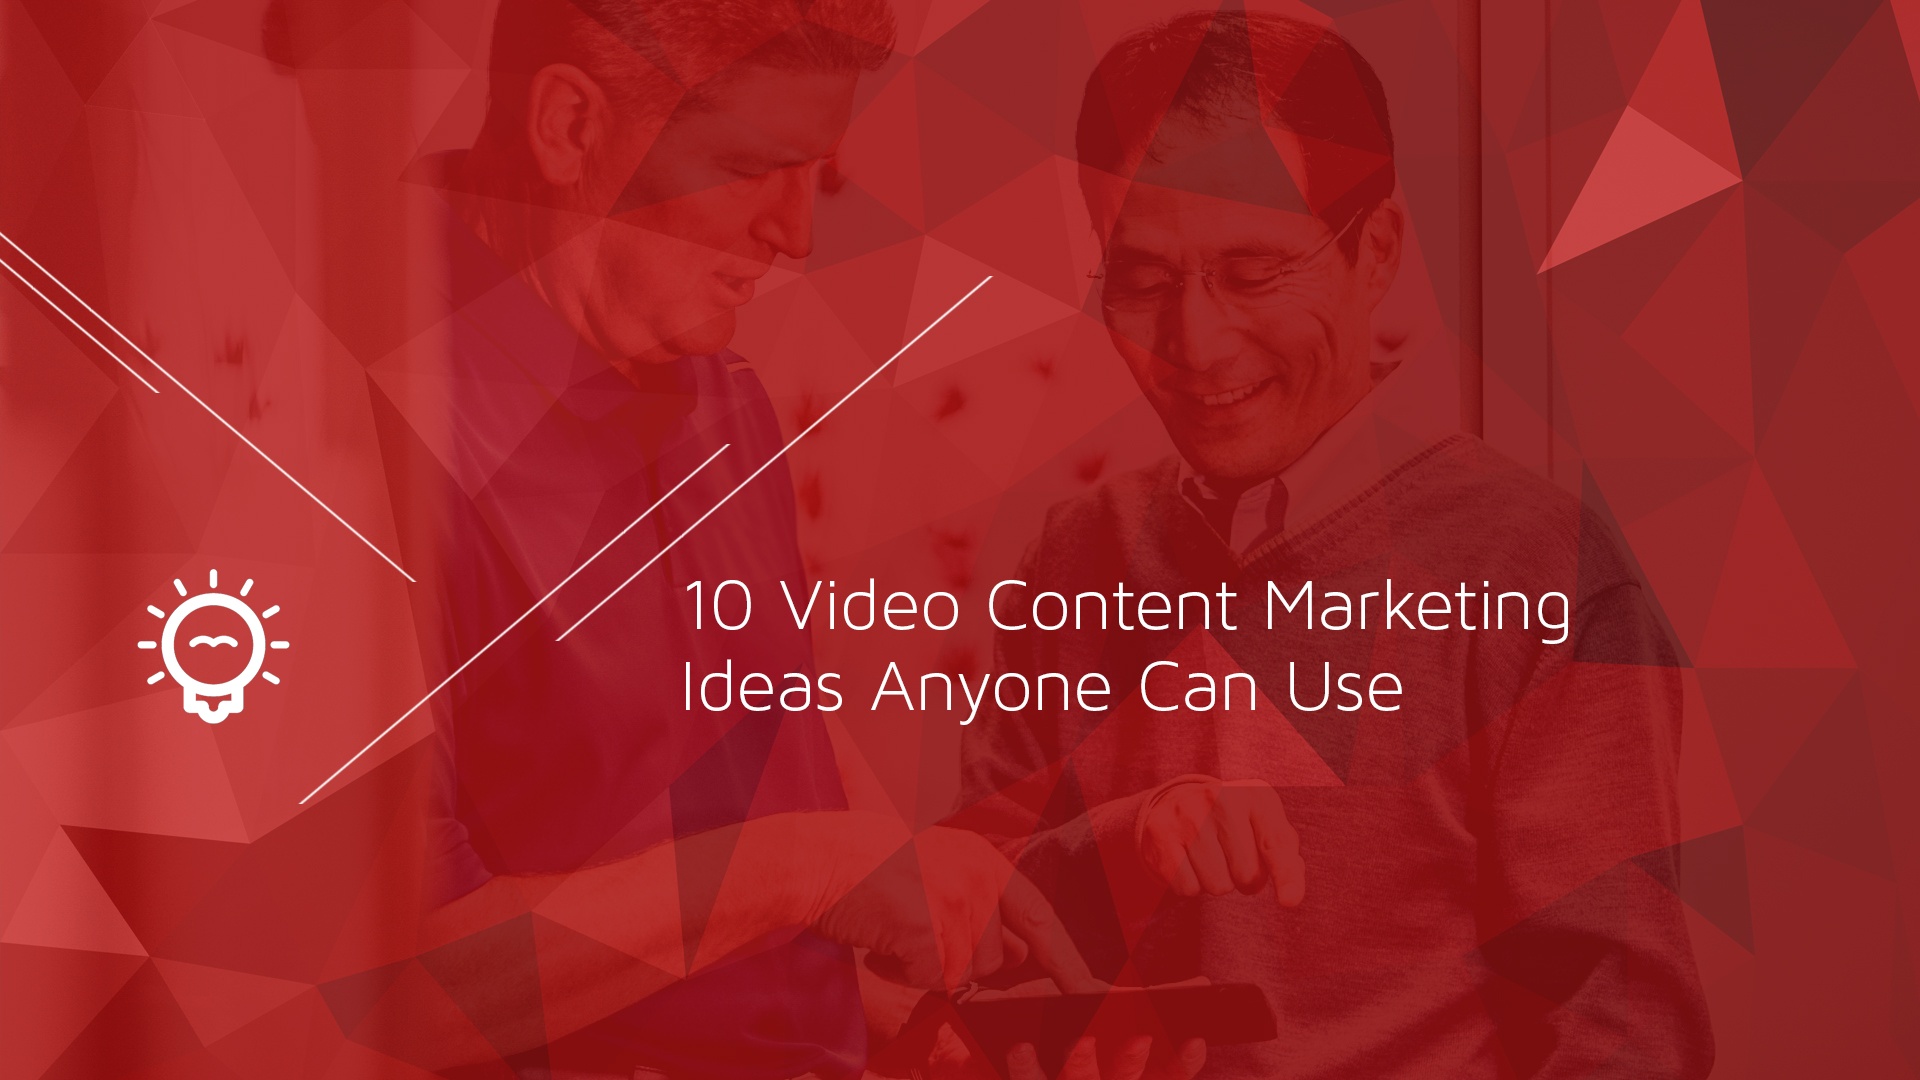 1 - 10 Video Content Marketing Ideas Anyone Can Use-1.jpg